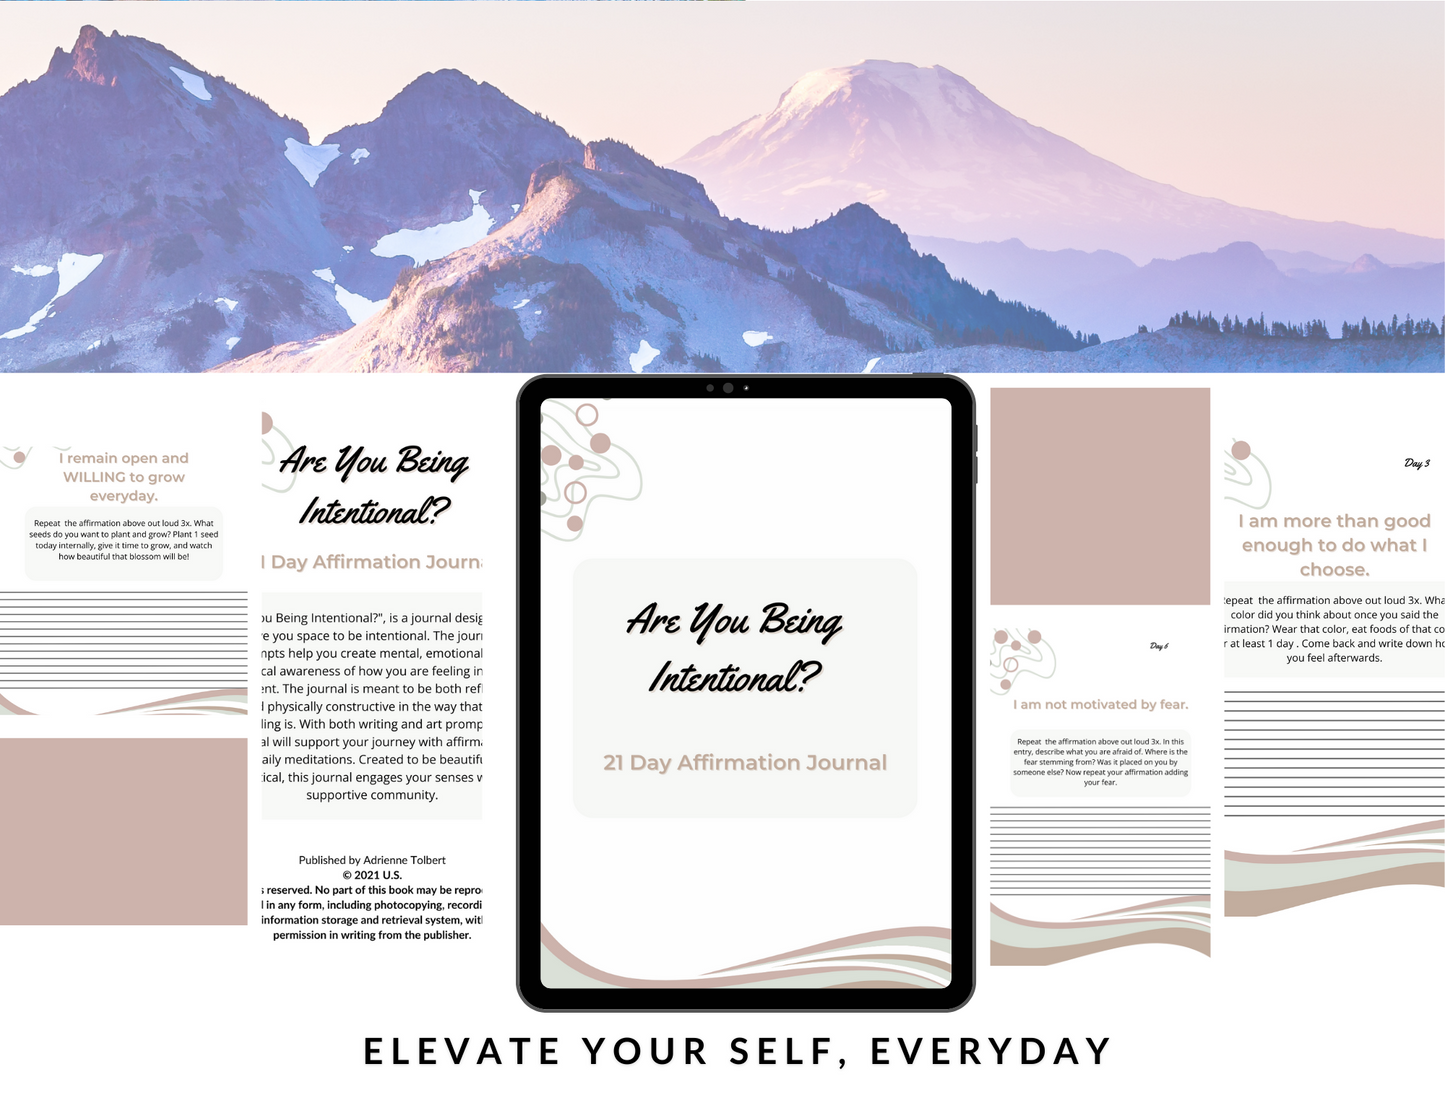 Are You Being Intentional? 21 Day Affirmation Journal